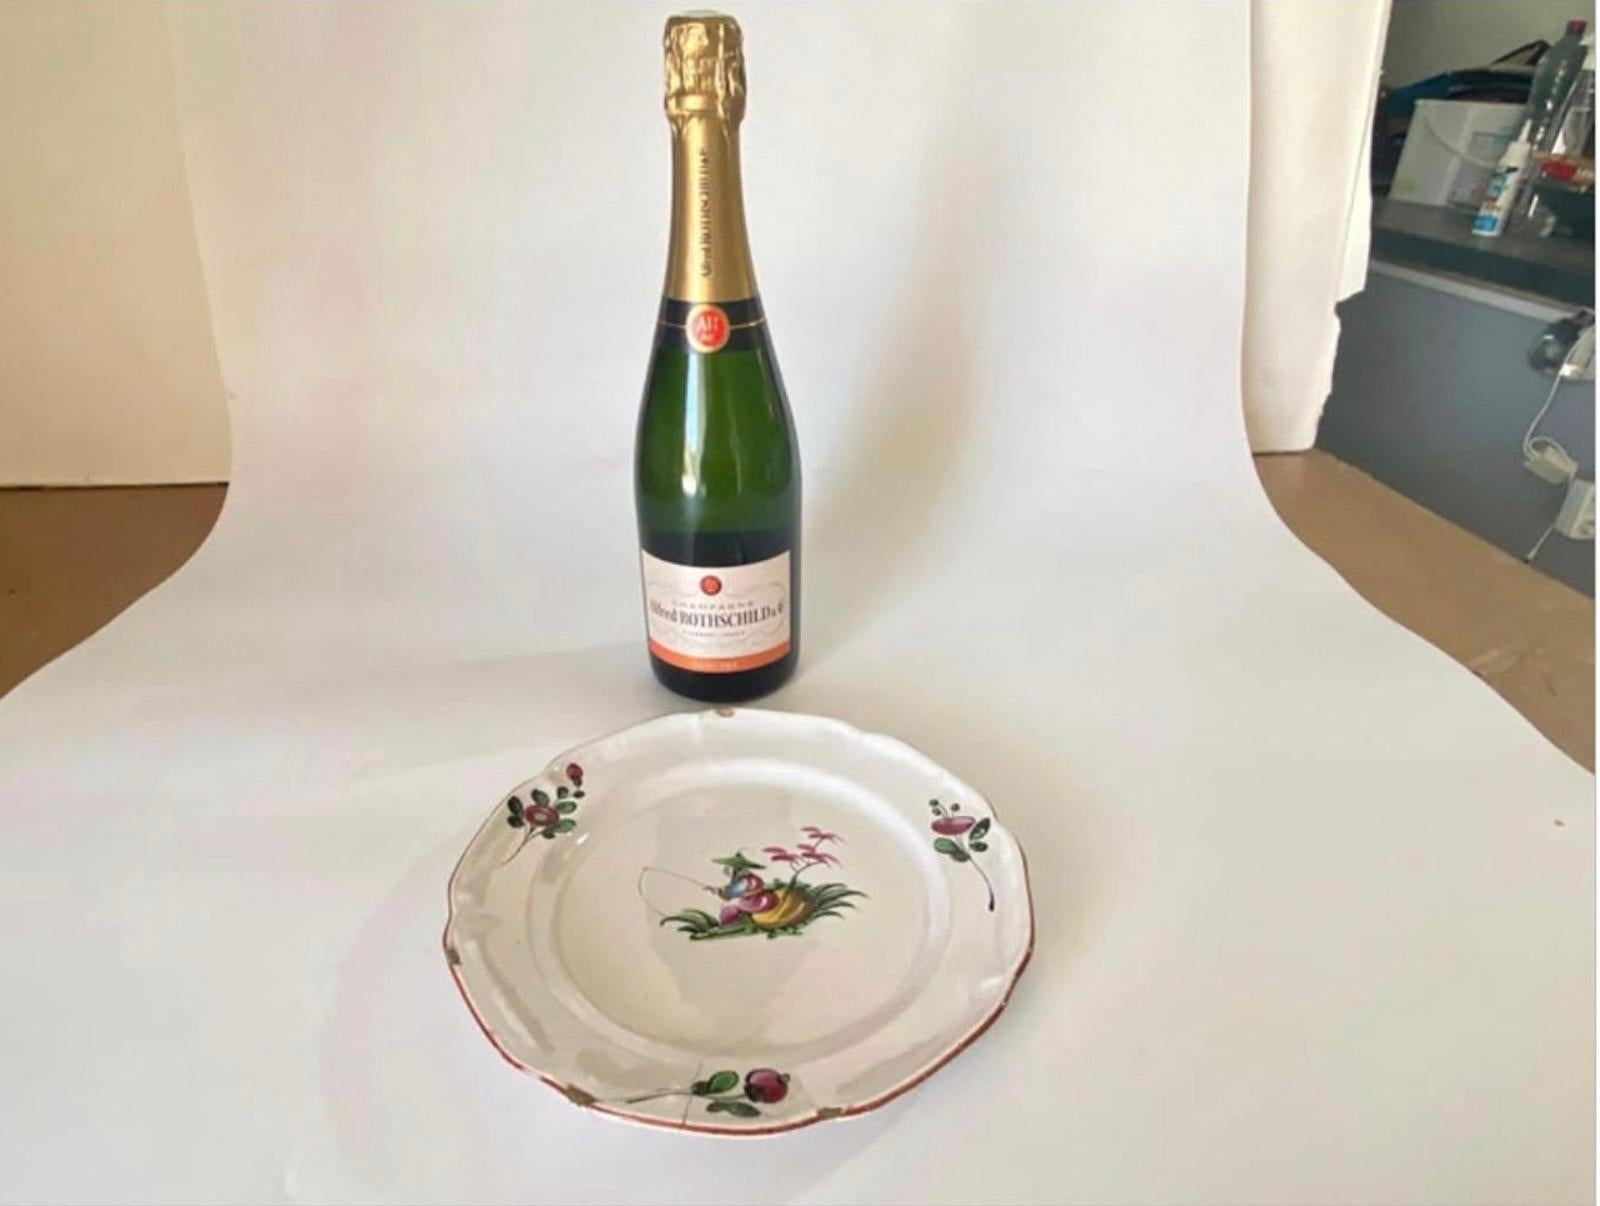 The Set of plate is in faience. It has been made in France, during the 19th century.
The pattern decor is a rooster, Fisherman, Flowers and the main colors green and red.